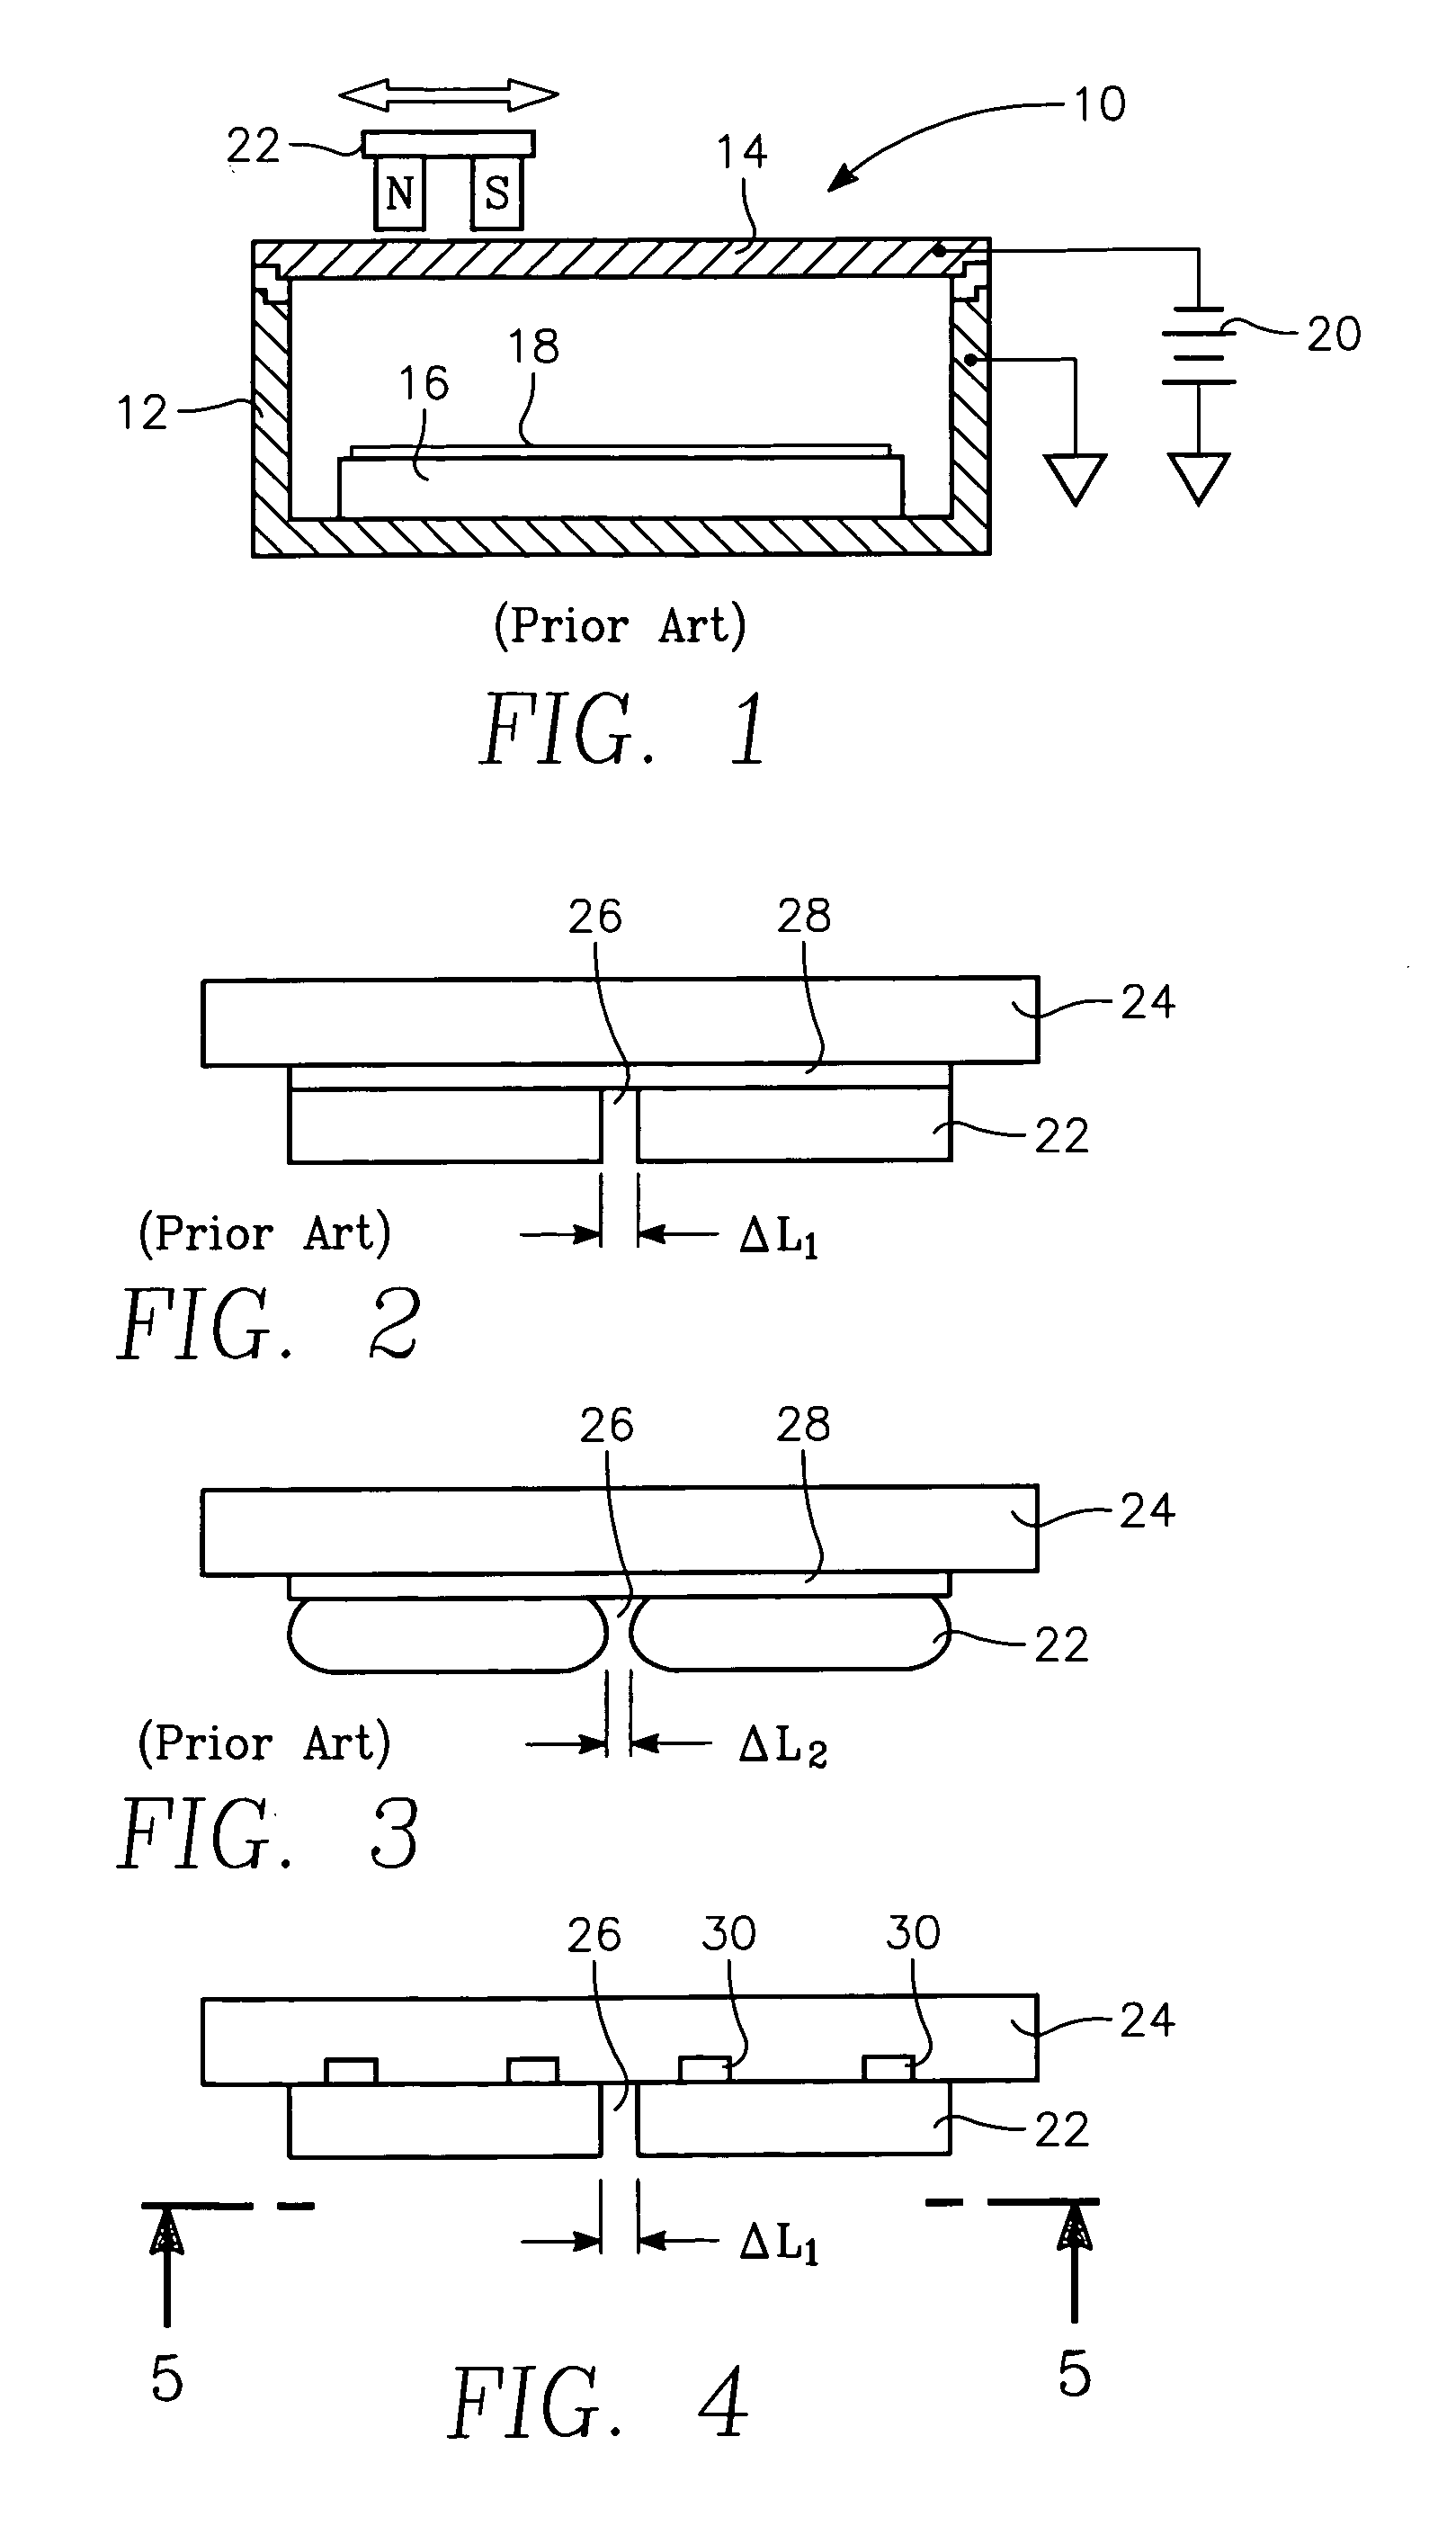 Bonding of target tiles to backing plate with patterned bonding agent